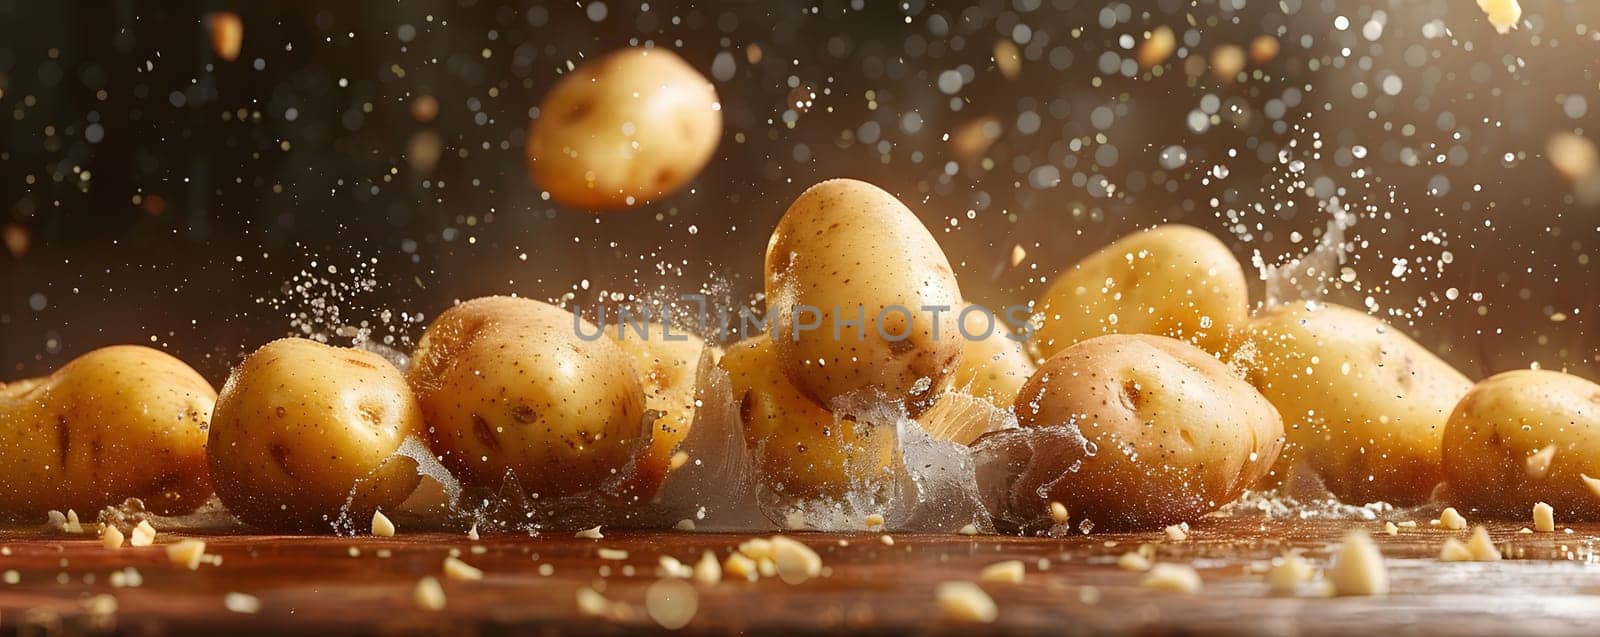 Potatoes, a terrestrial plant, are falling on a wooden table. This event of nature can inspire art, cuisine, and cooking science